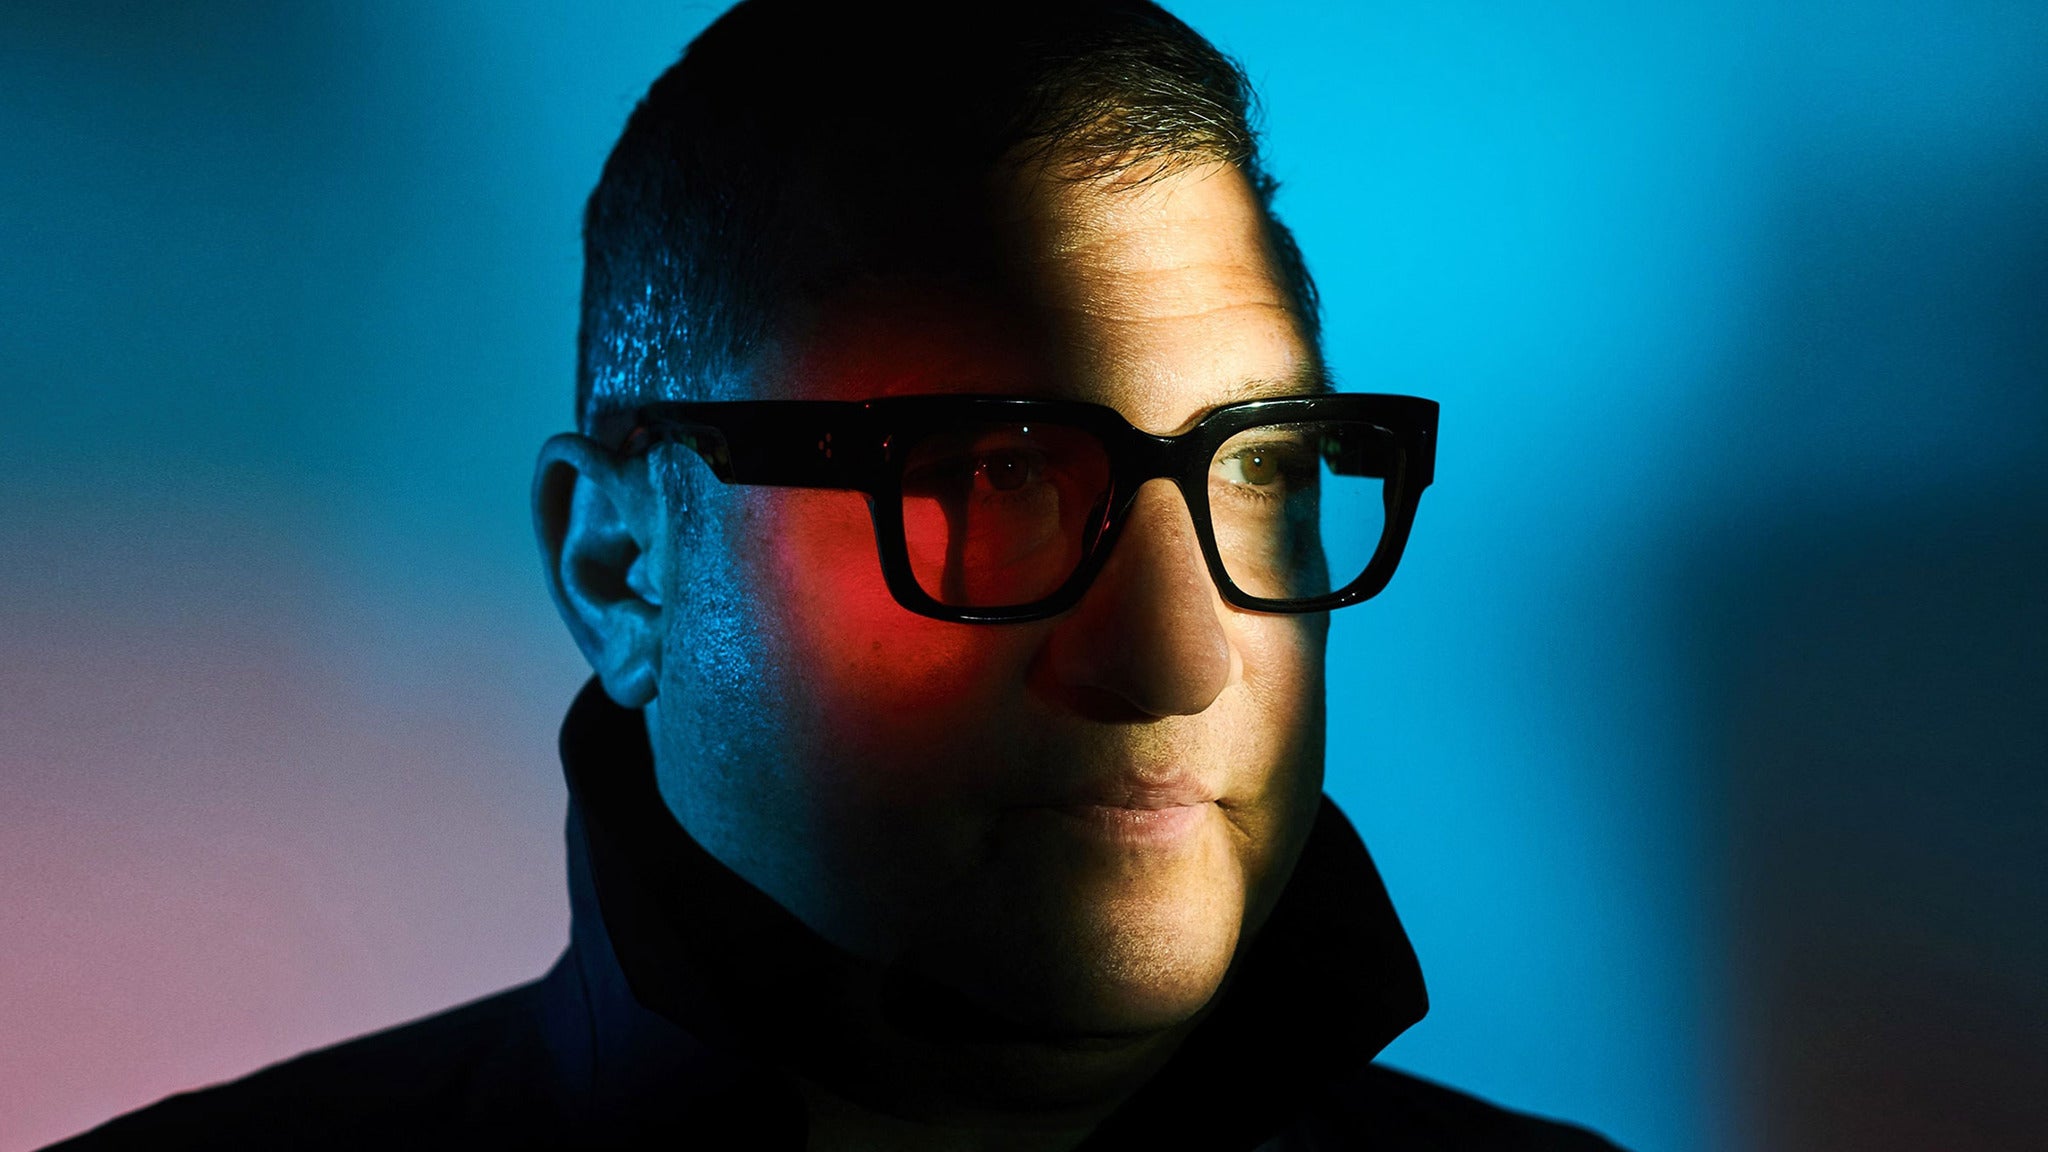 Greg Dulli in Los Angeles promo photo for Greg Dulli VIP Package presale offer code